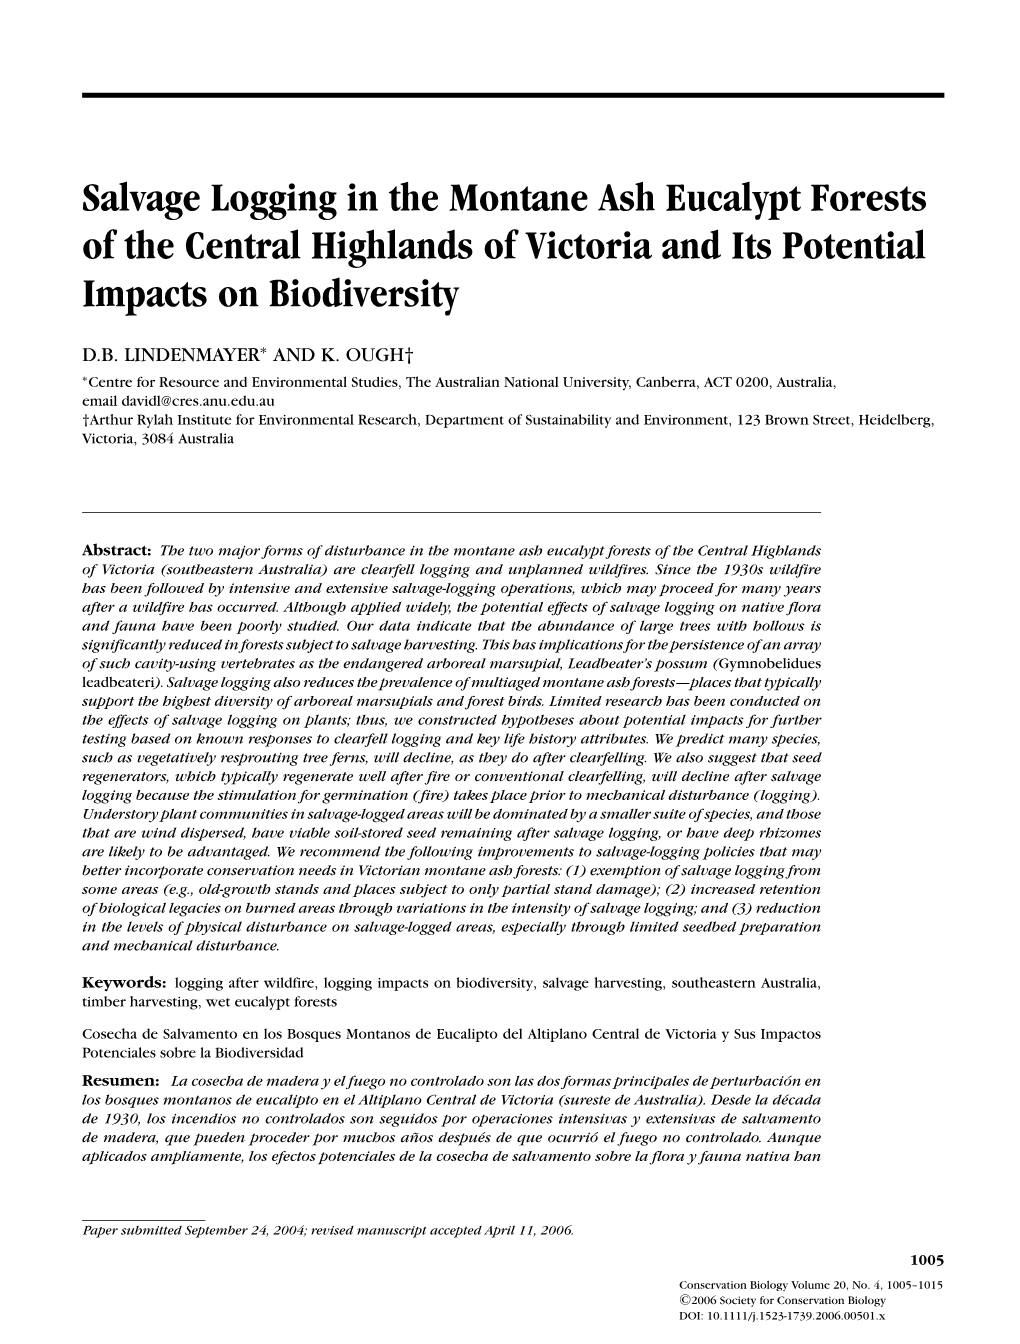 Salvage Logging in the Montane Ash Eucalypt Forests of the Central Highlands of Victoria and Its Potential Impacts on Biodiversity